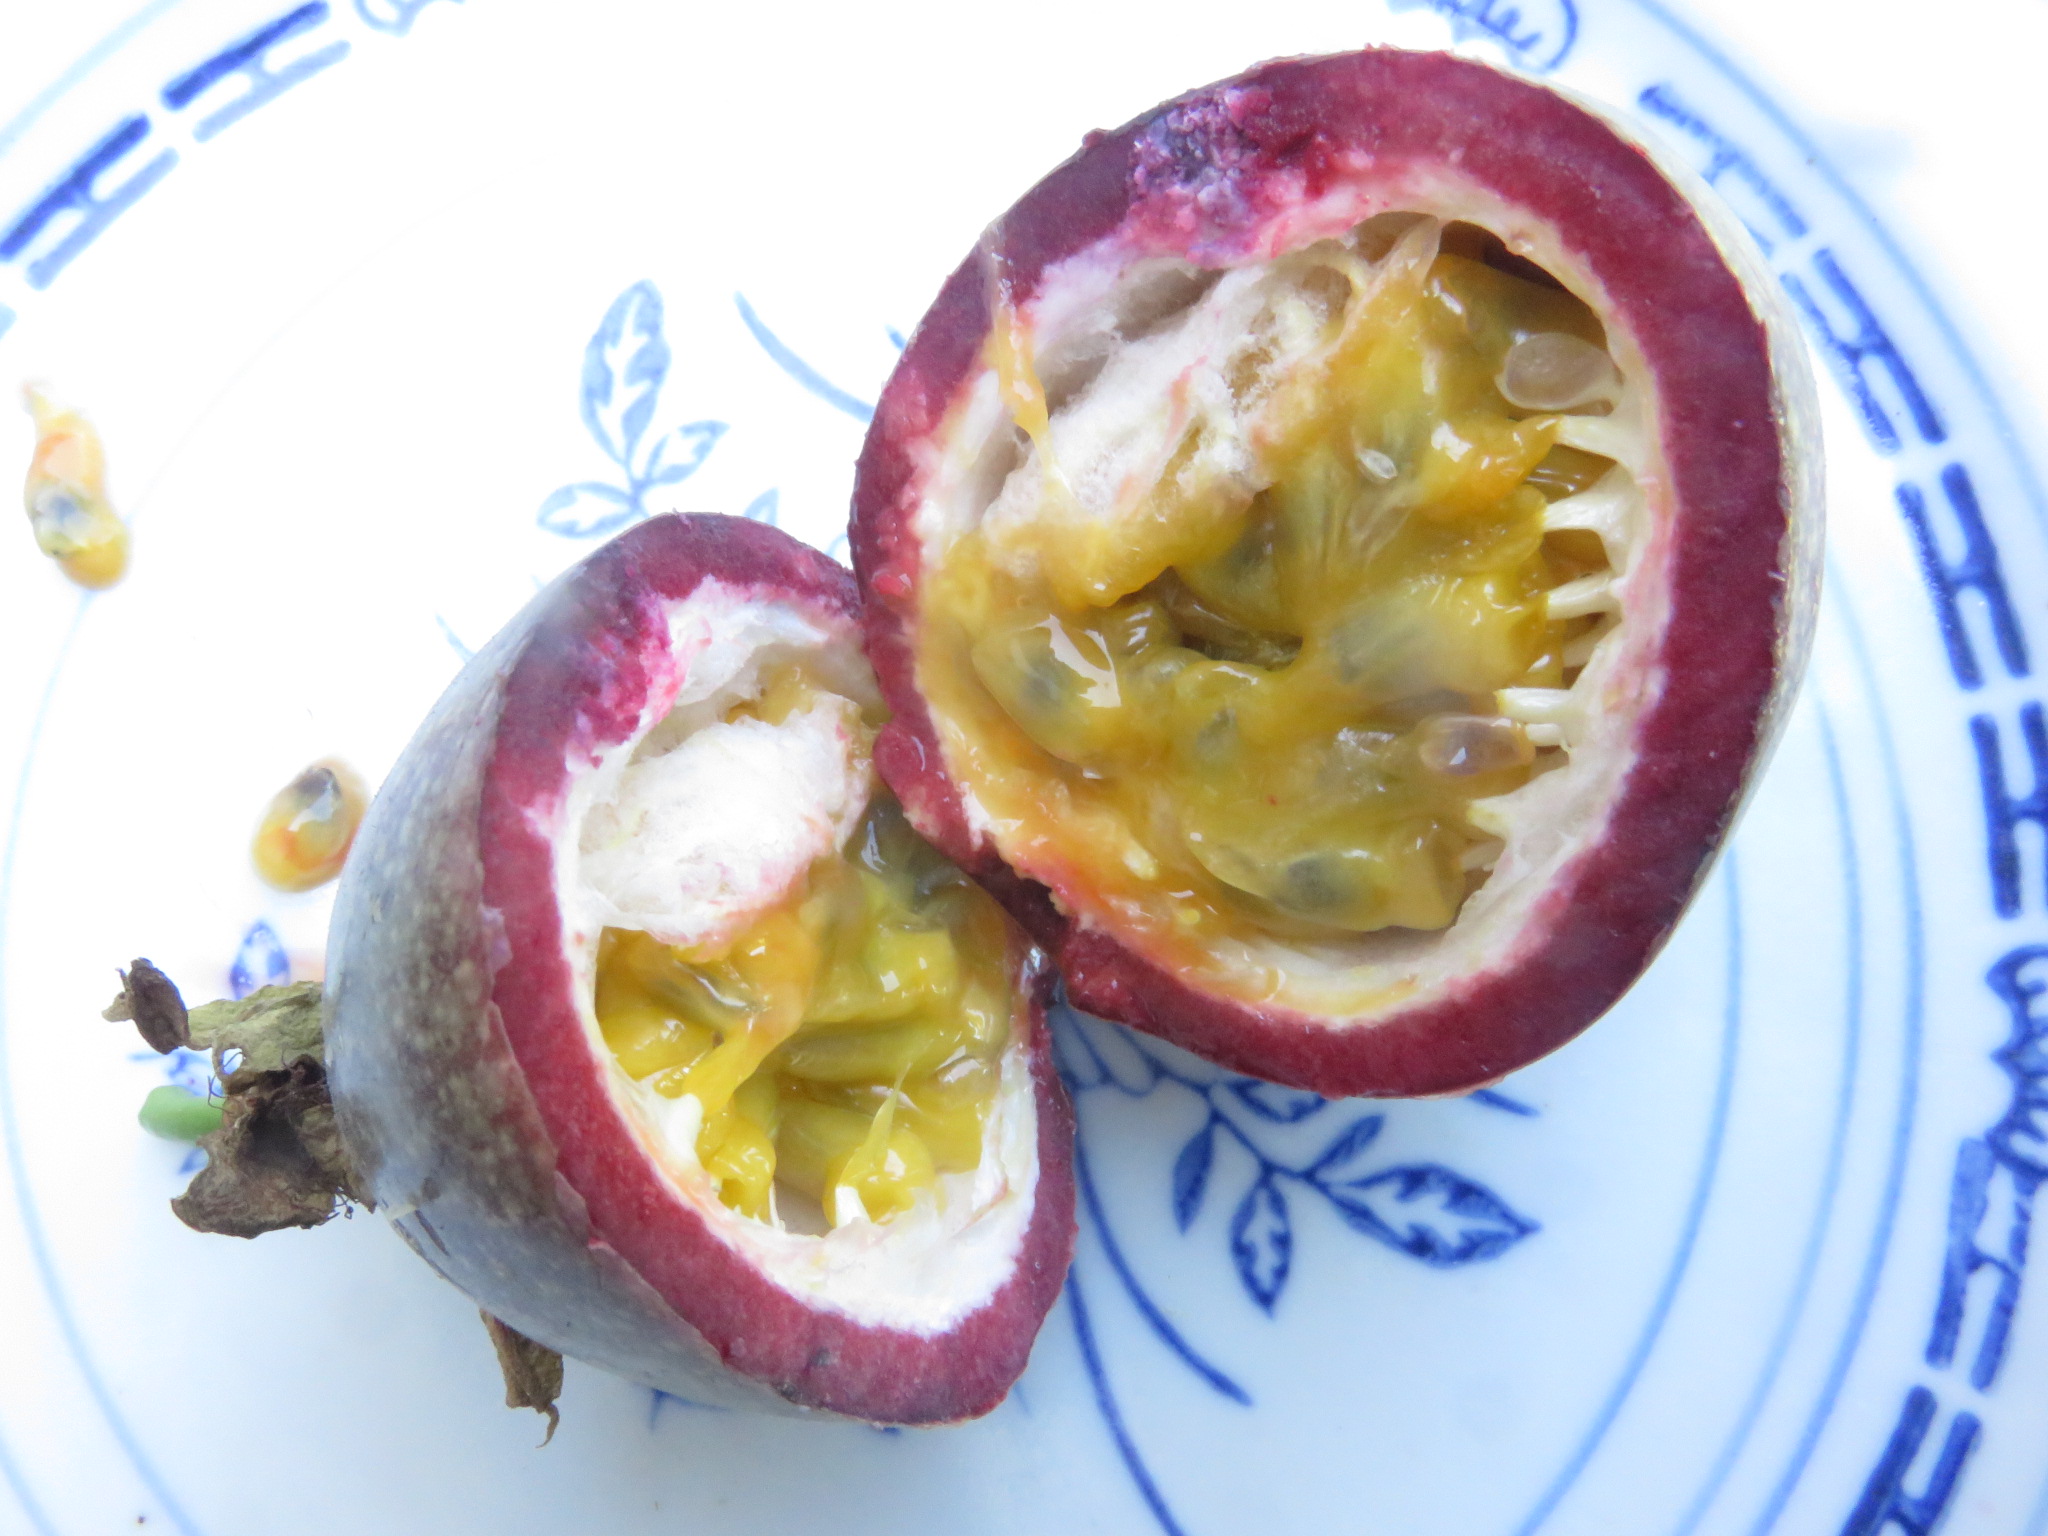 Passion fruit grow well from fresh seed.